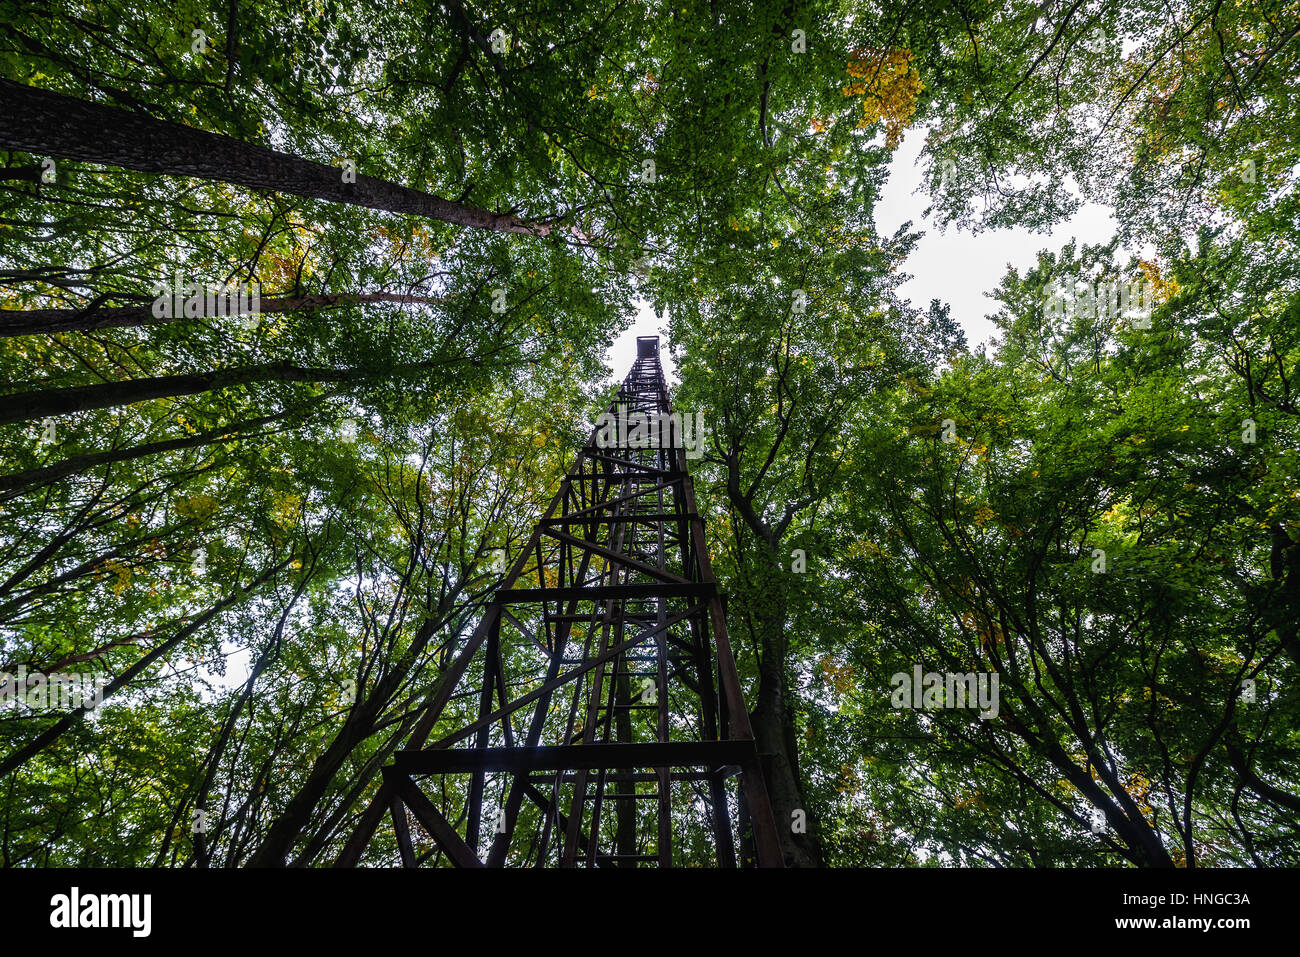 Abandoned beacon light metal tower of old arport in Wrzeszcz district of Gdansk, Poland Stock Photo